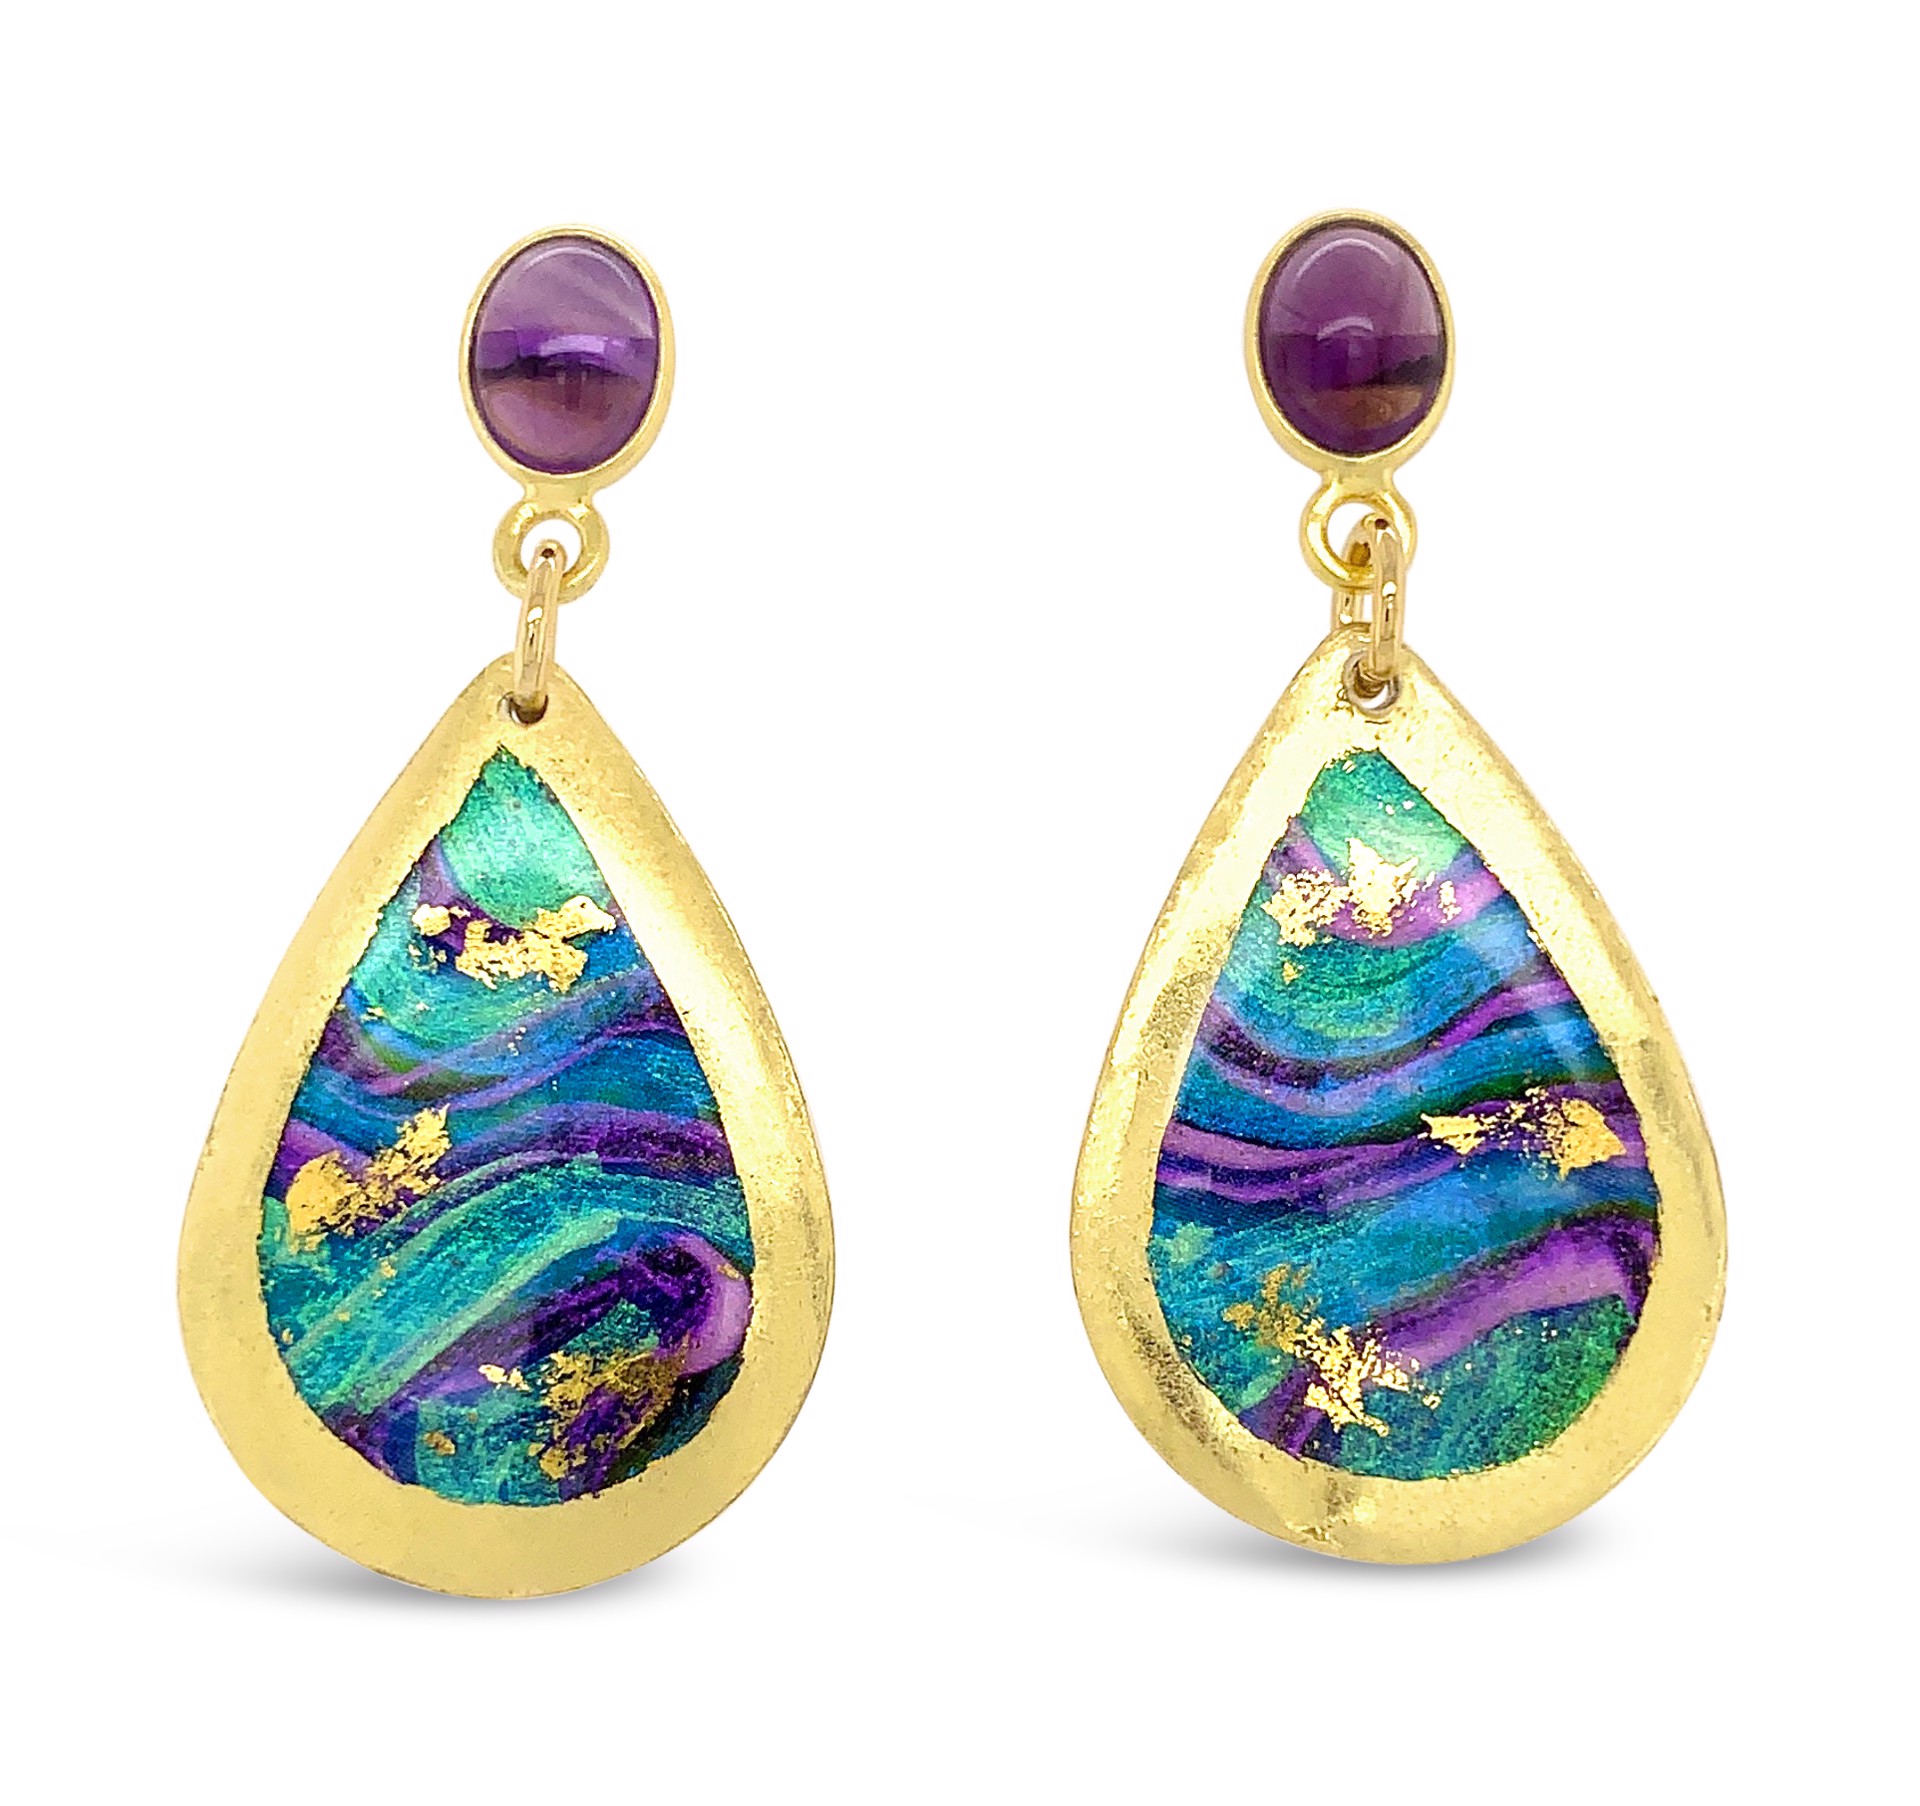 Abalone Small Teardrop Earring with Amethyst Post by Evocateur